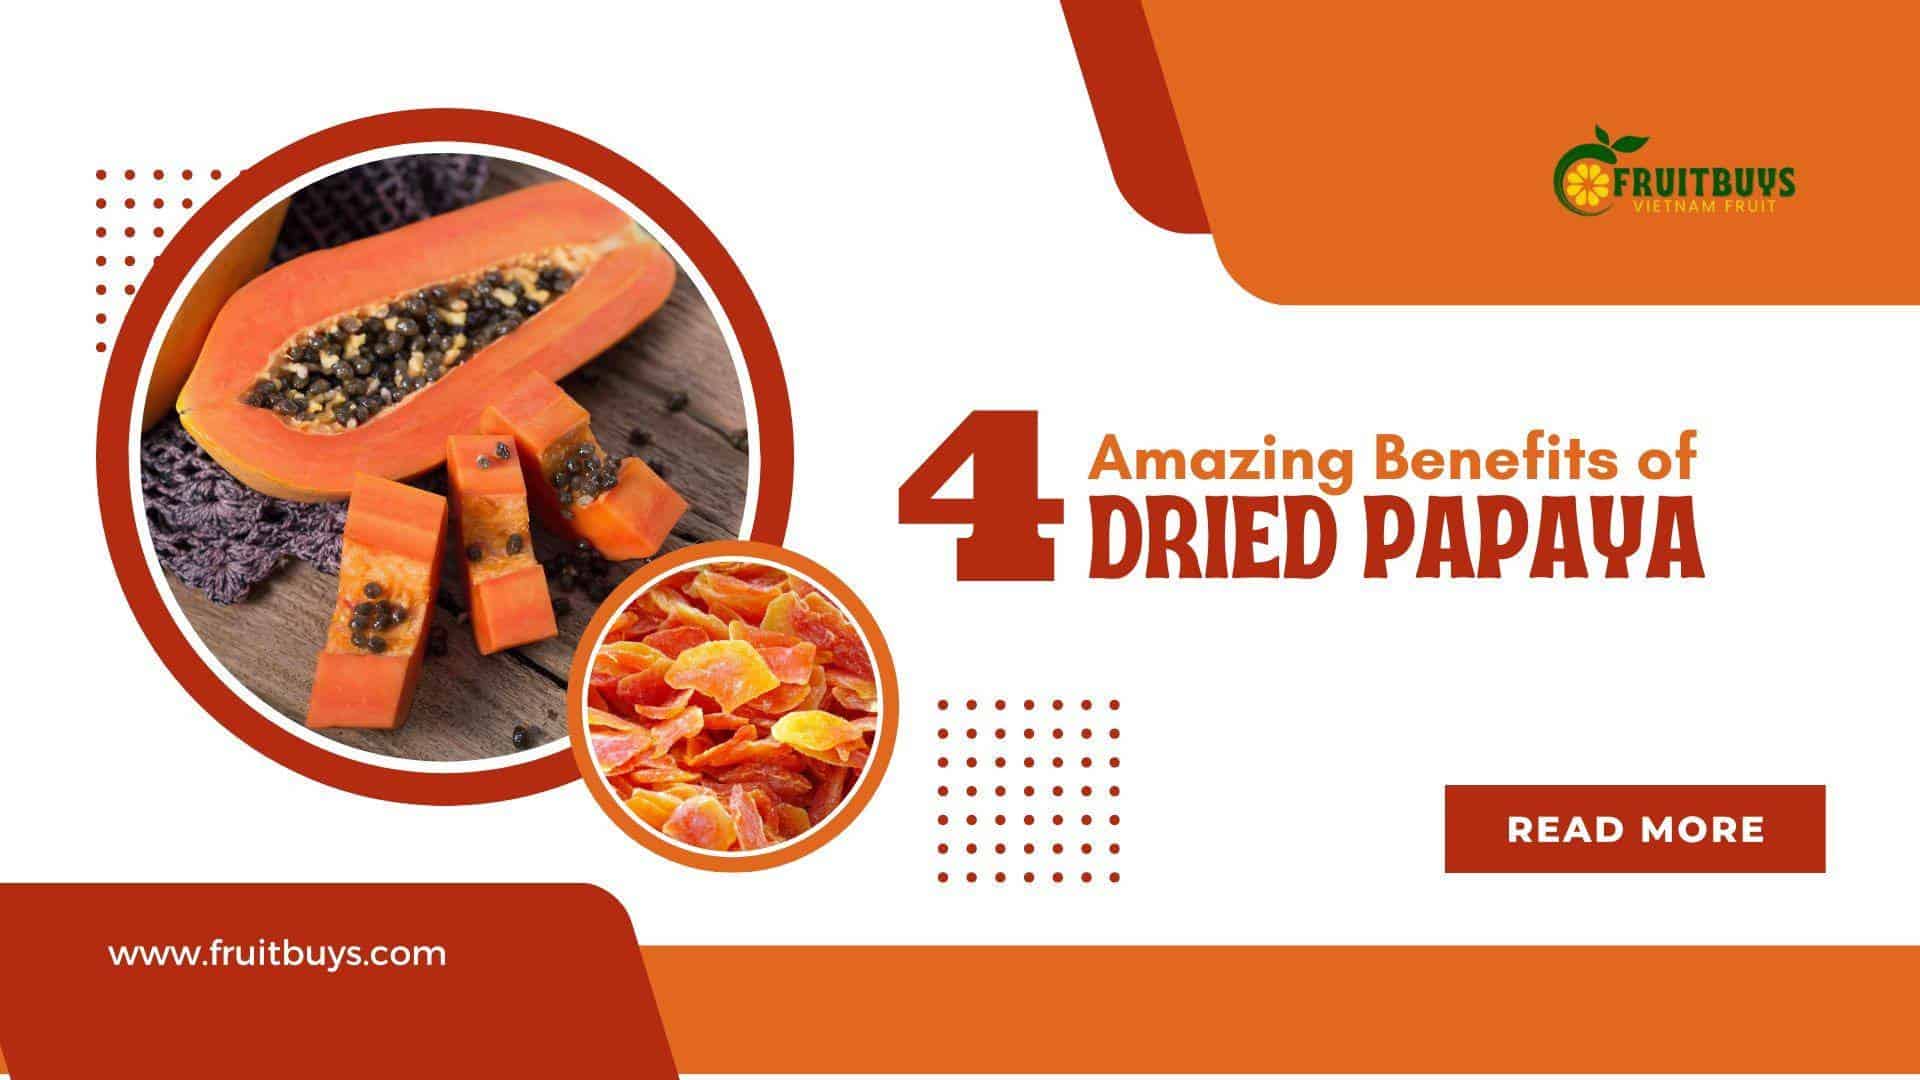 FruitBuys Vietnam  4 Amazing Benefits Of Dried Papaya For Your Health